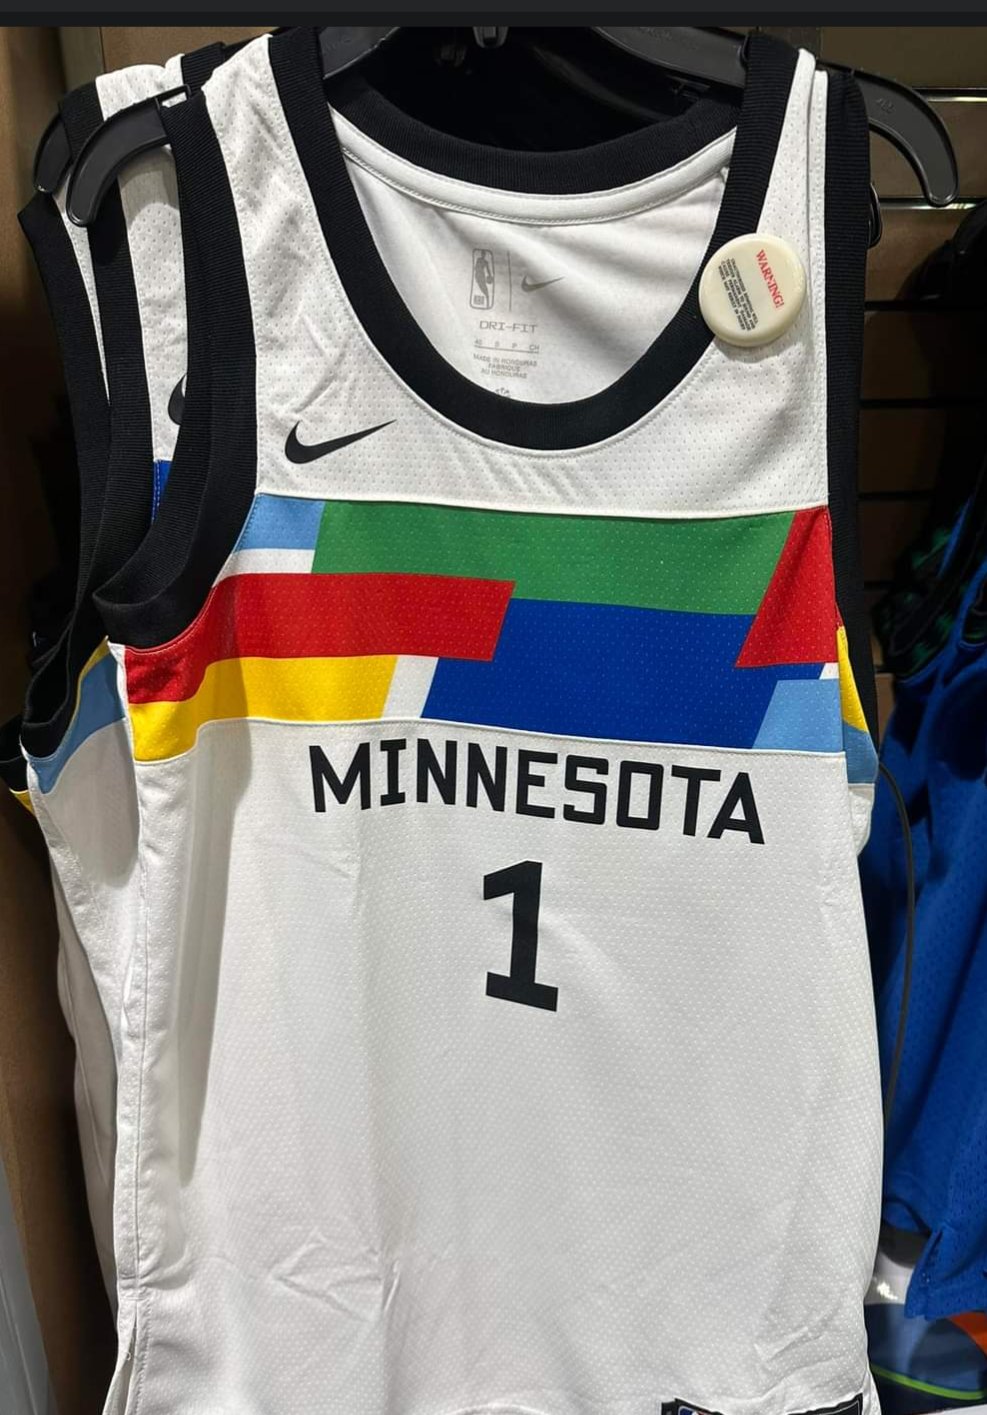 Minnesota Timberwolves 2022-23 City Edition Jersey Leaked - Inspired by  Famous Bob Dylan Mural